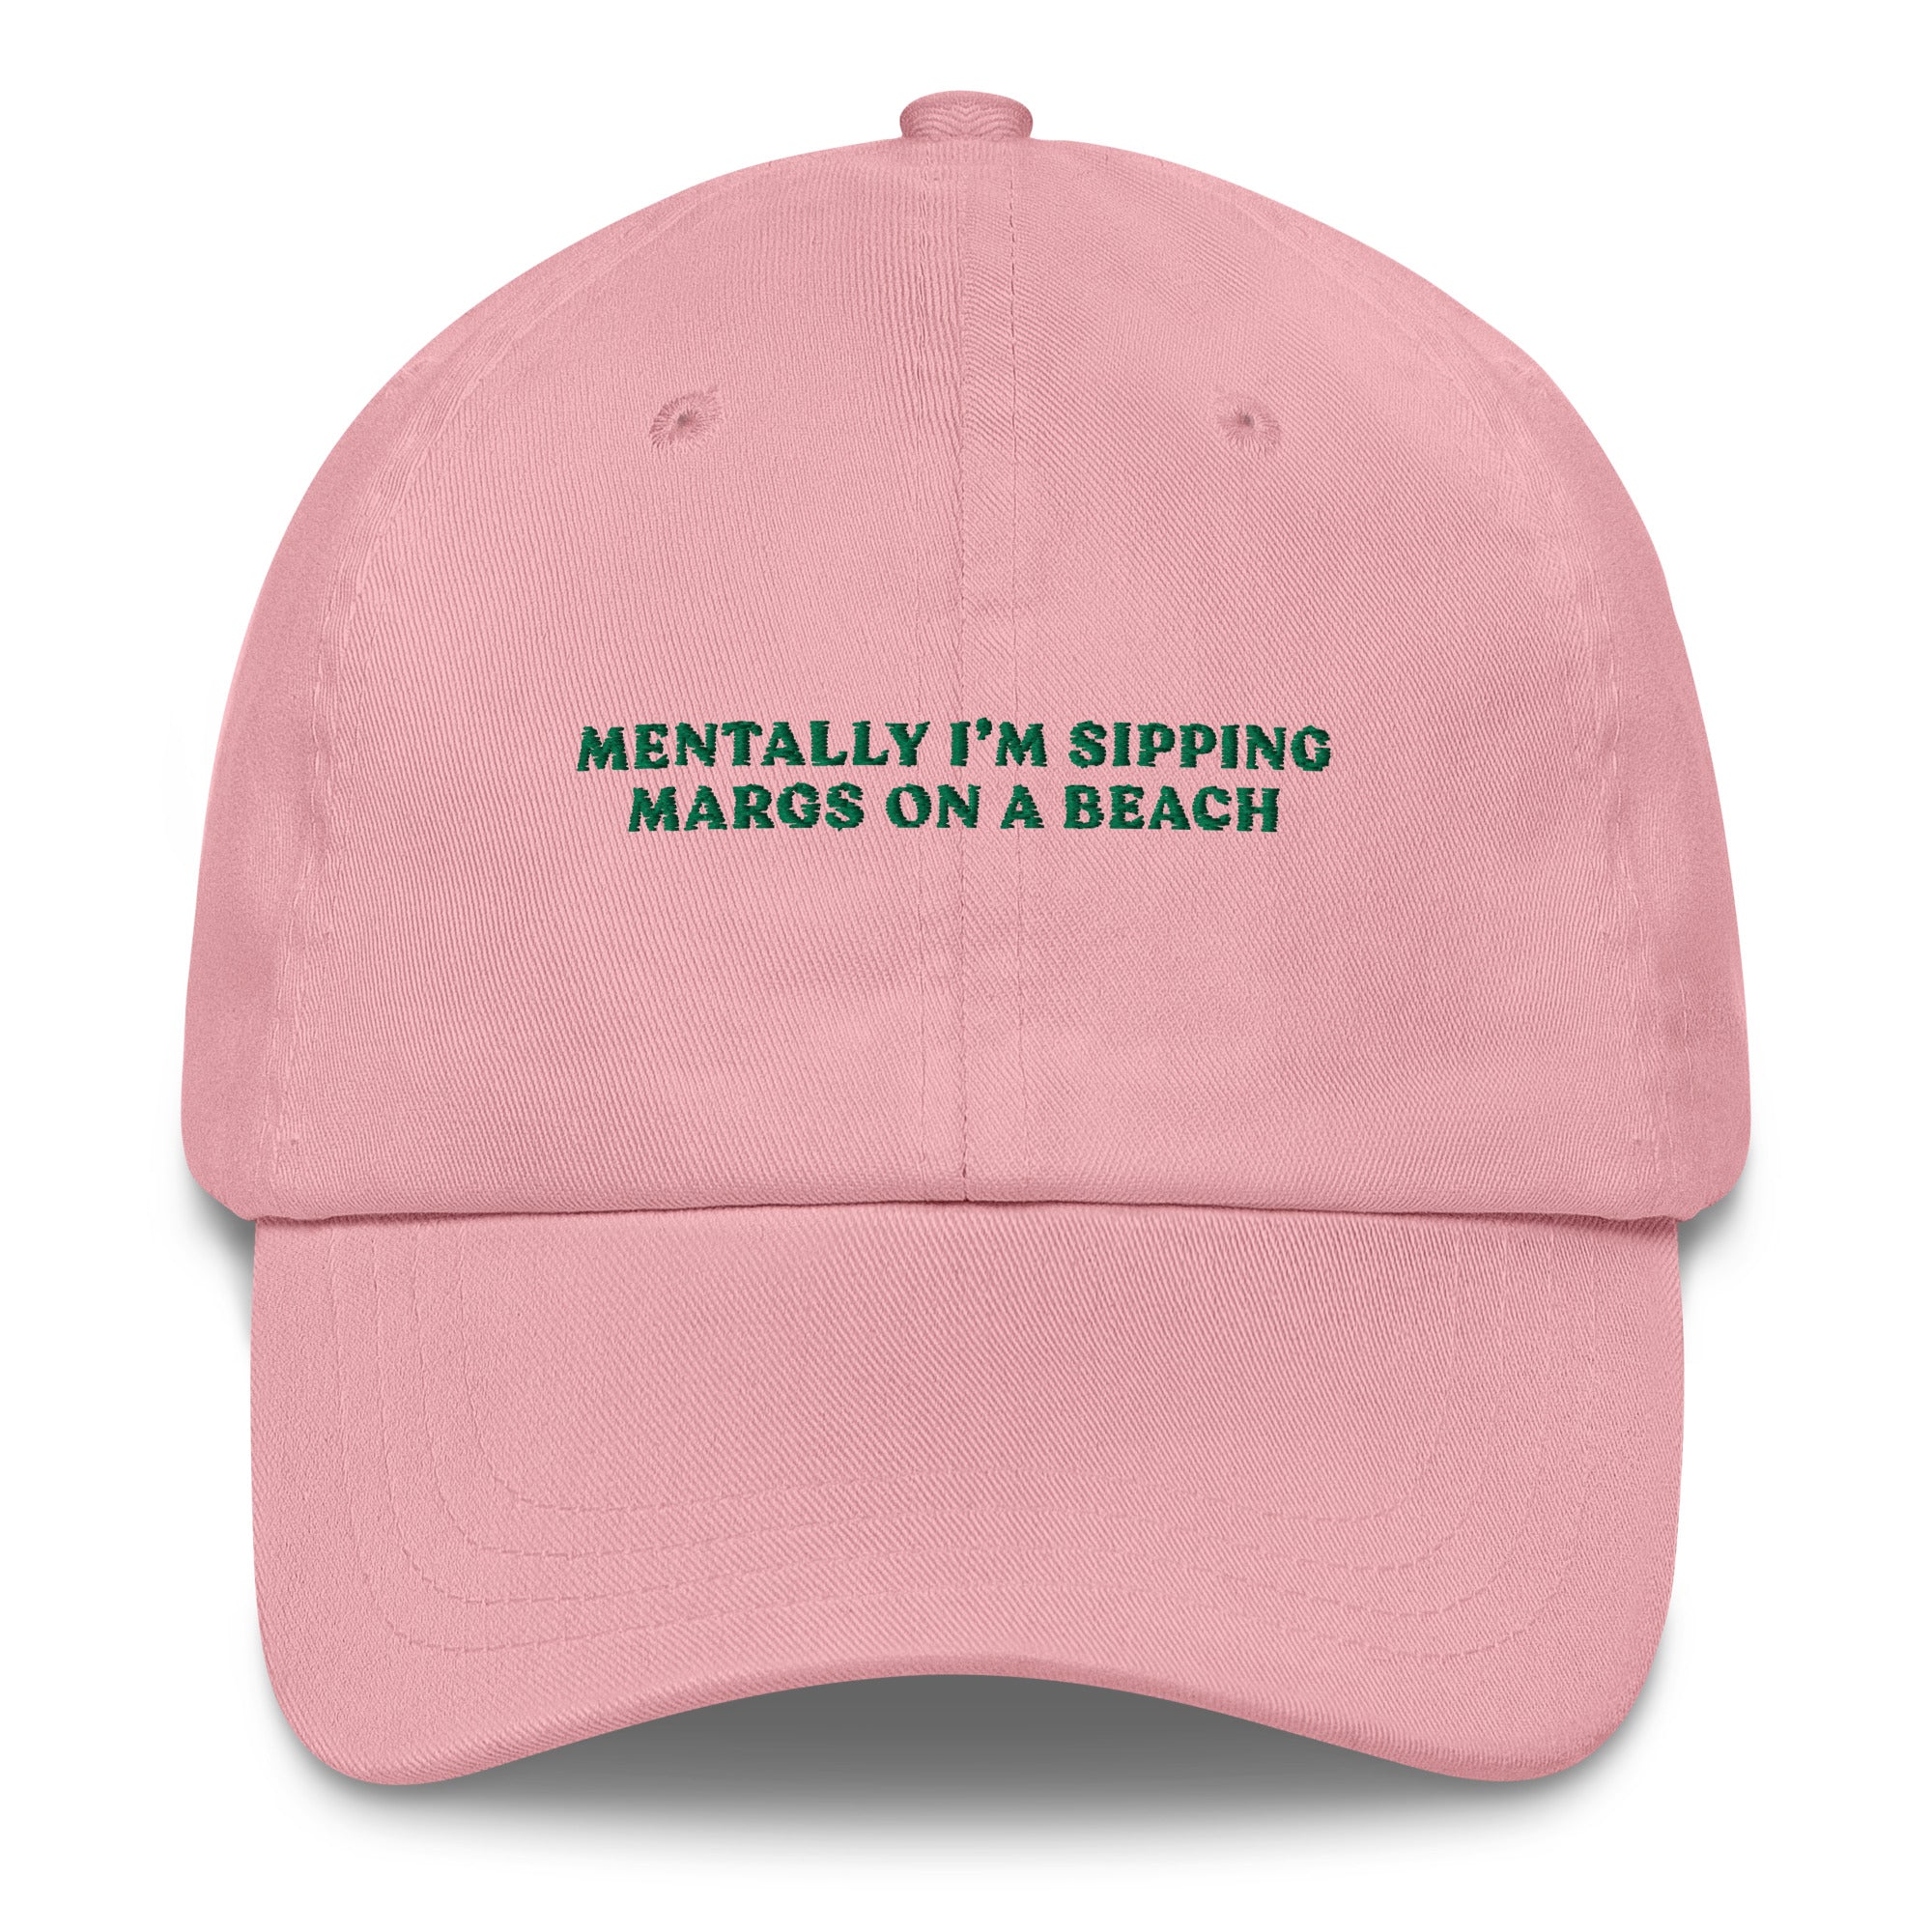 Mentally I'm sipping margs on a beach - Cap